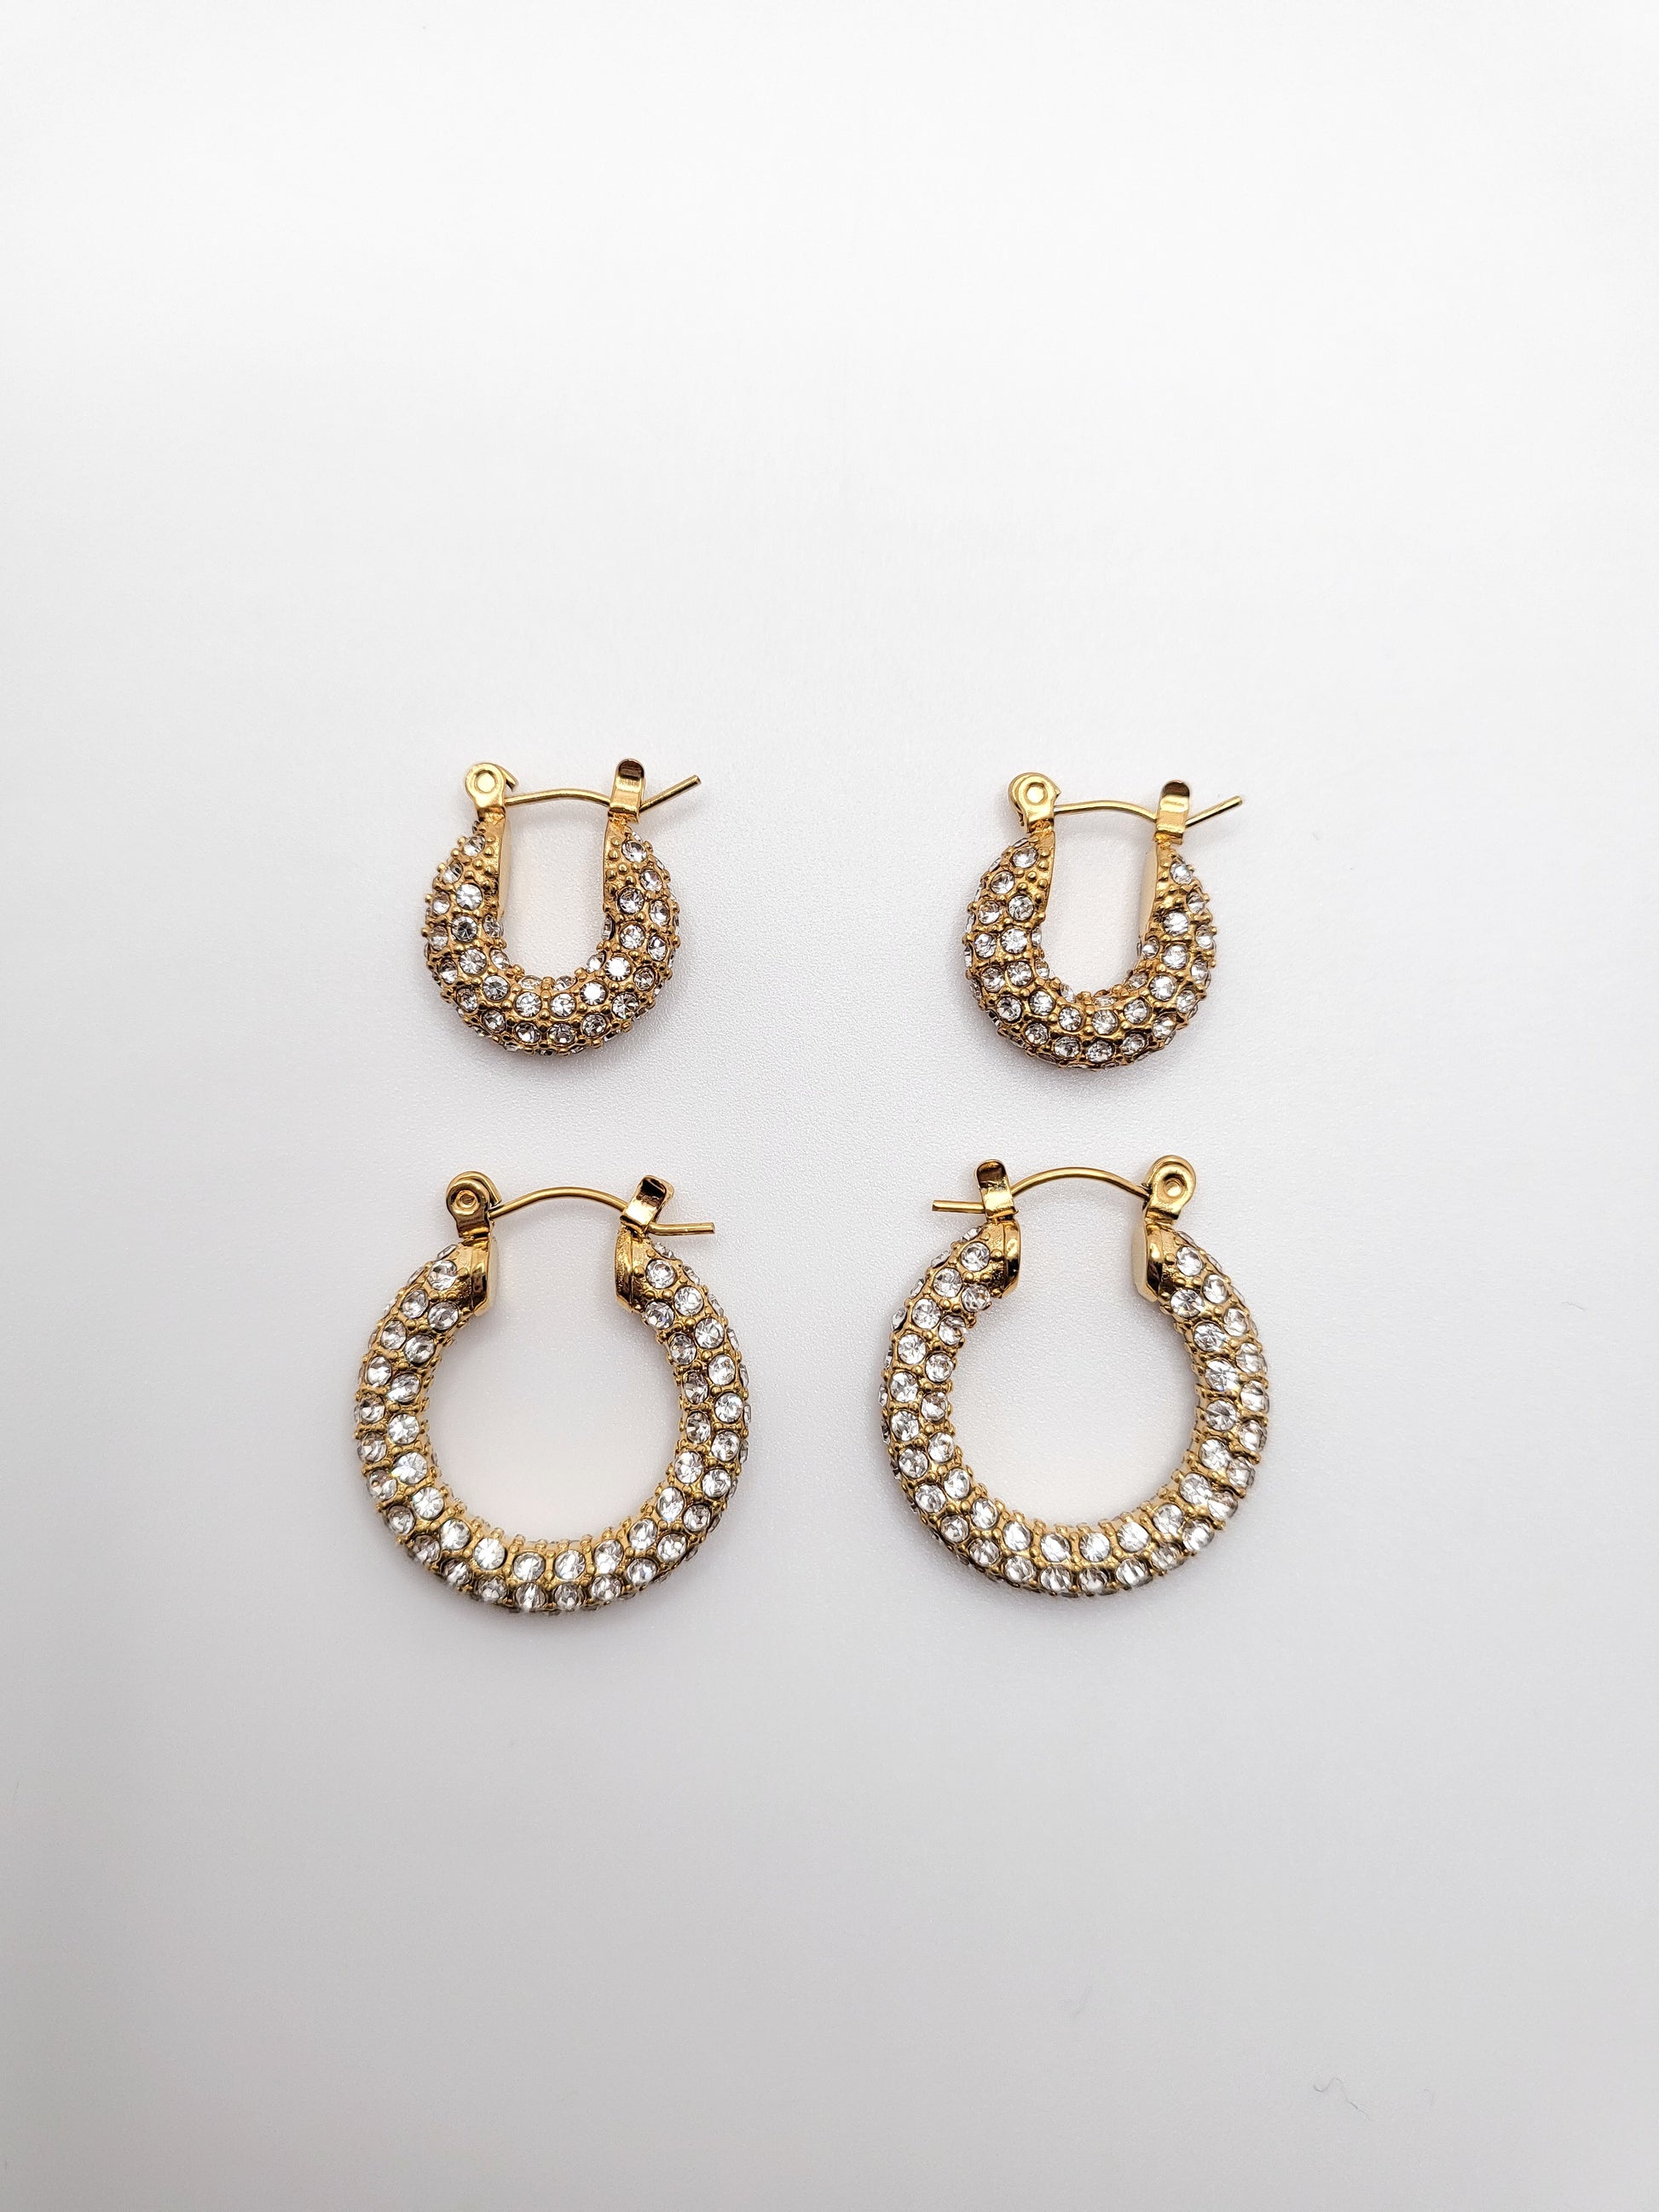 Gold plated earrings with zircons in small and medium